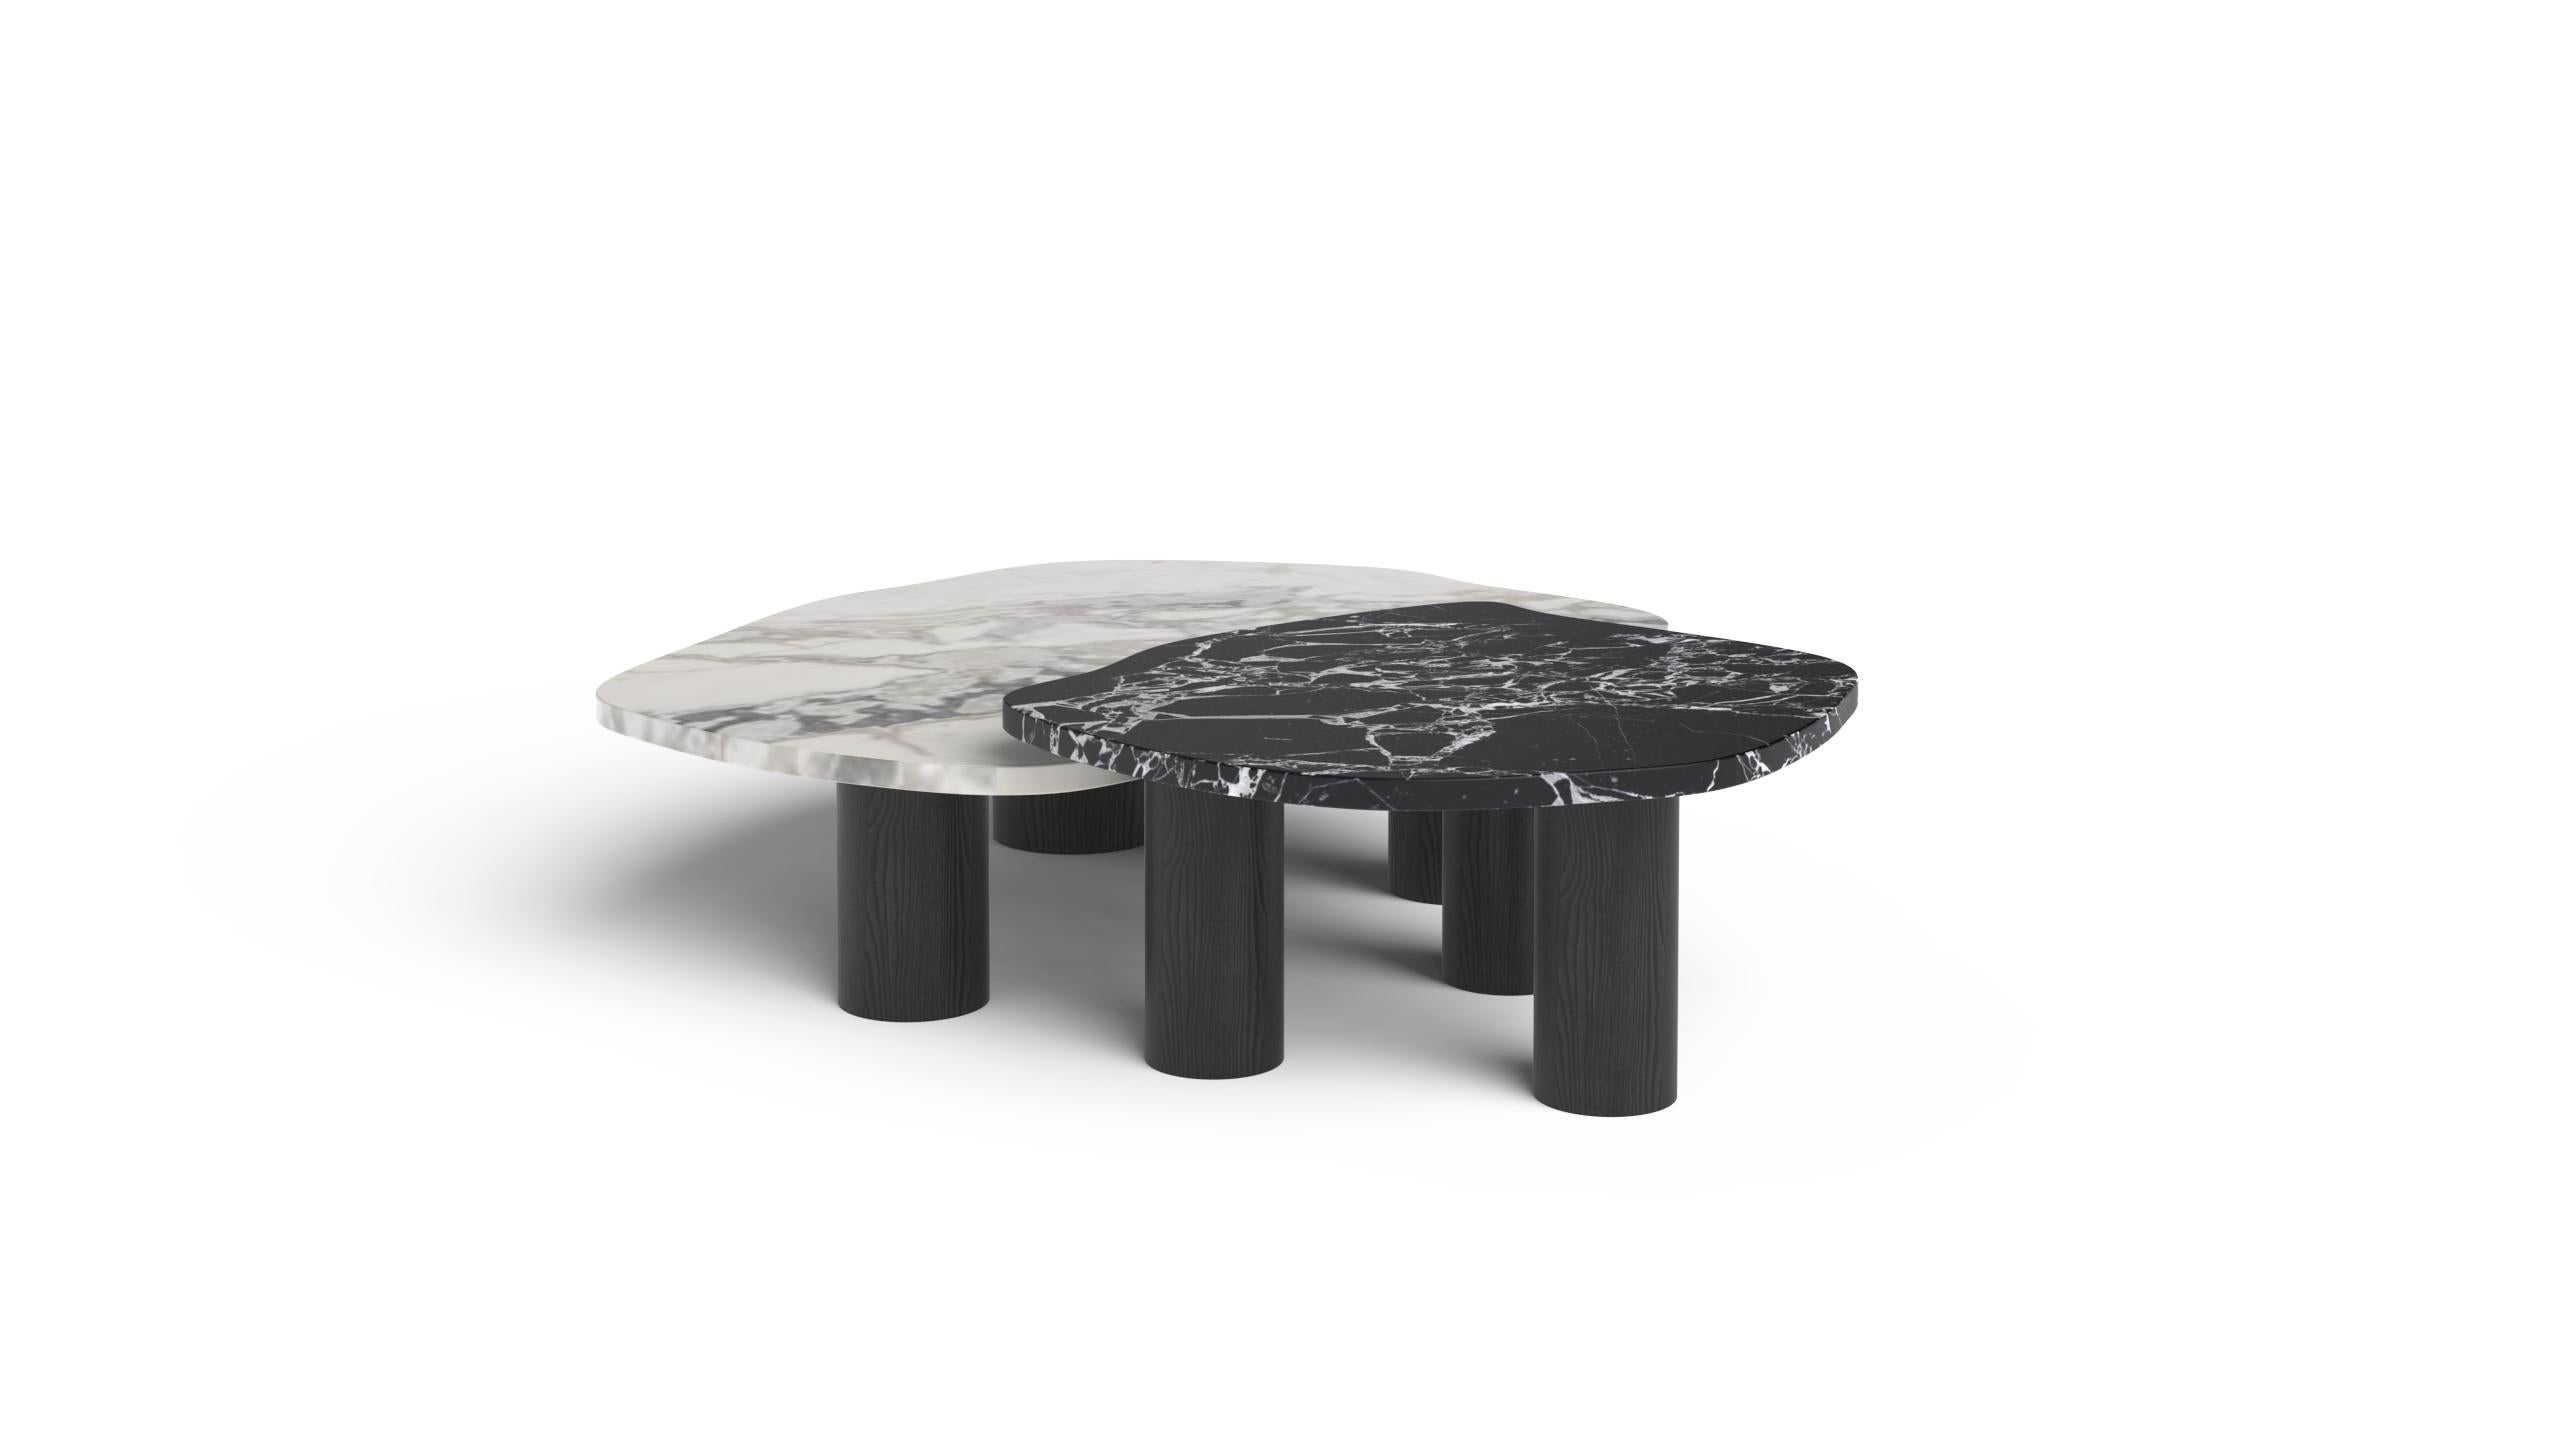 Curve coffee tables, Contemporary Collection, Handcrafted in Portugal - Europe by Greenapple.

Designed by Rute Martins for the Contemporary Collection and inspired by fluid lines like in nature, this low table set adds a representation of our